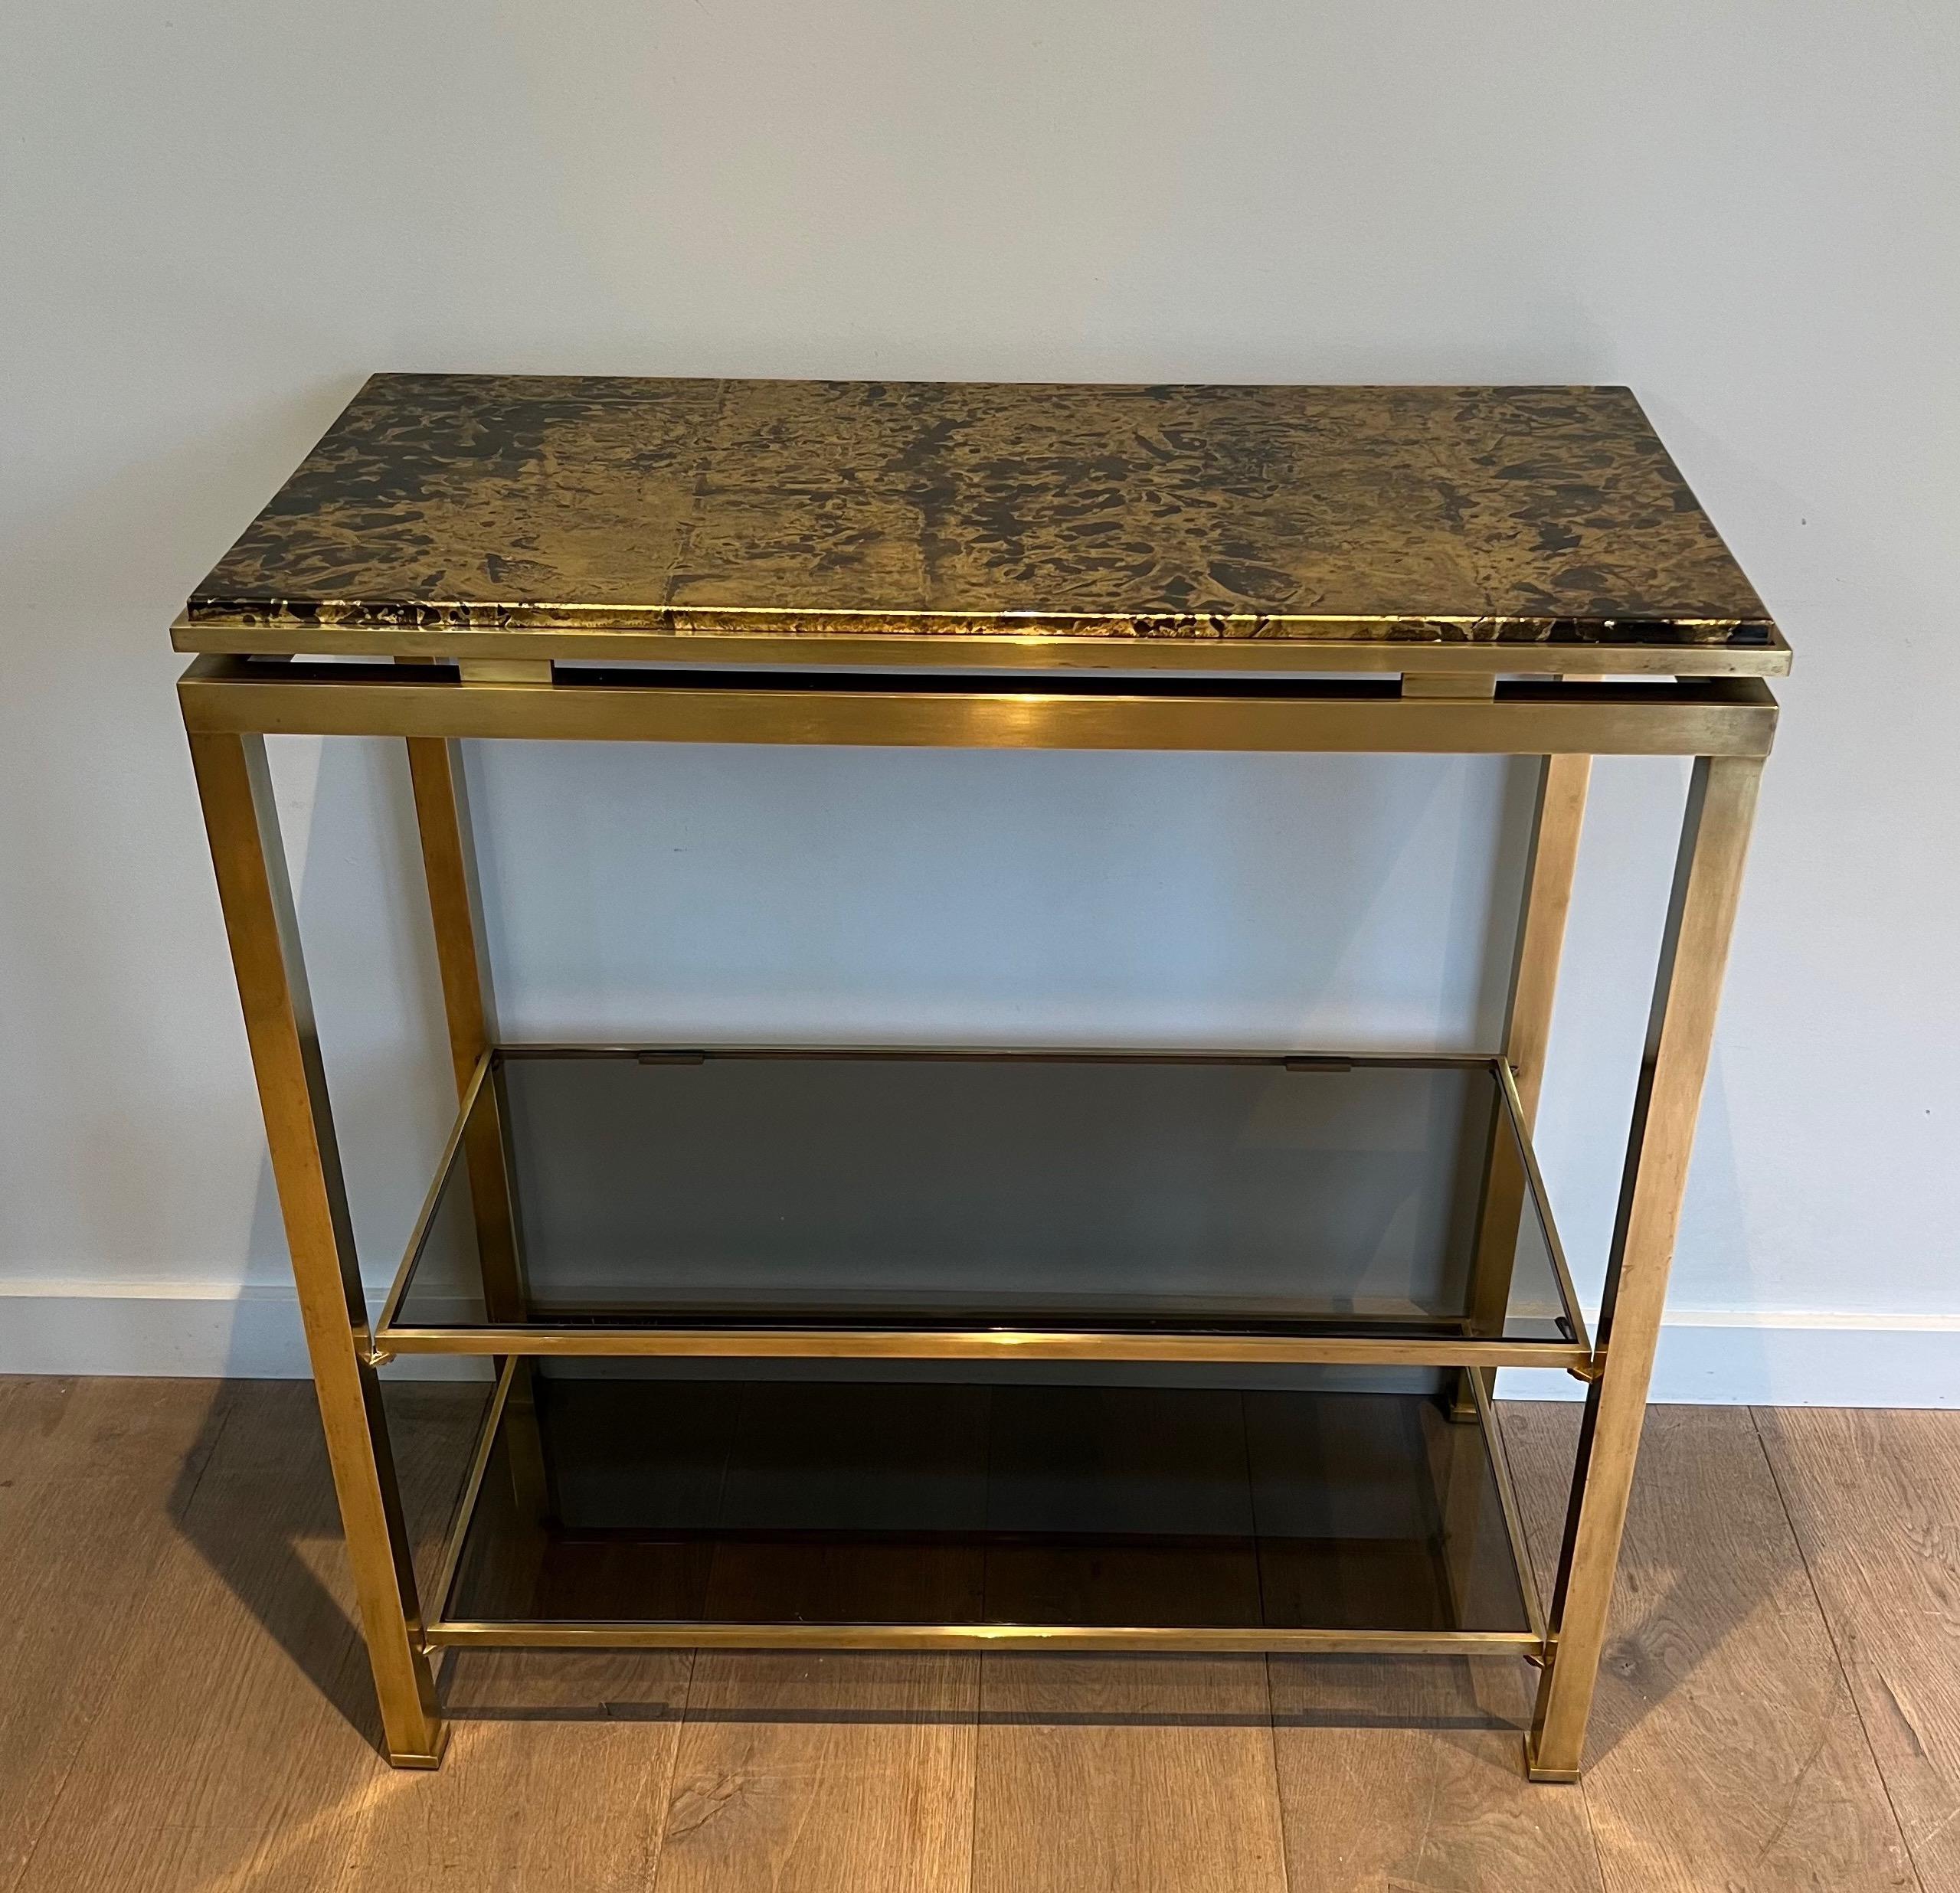 This rare and maybe unique console is made of brass with 2 smoked glass shelves on the bottom part and a gilt top imitating marble. This is a French work by Guy Lefèvre for Maison Jansen. Circa 1970